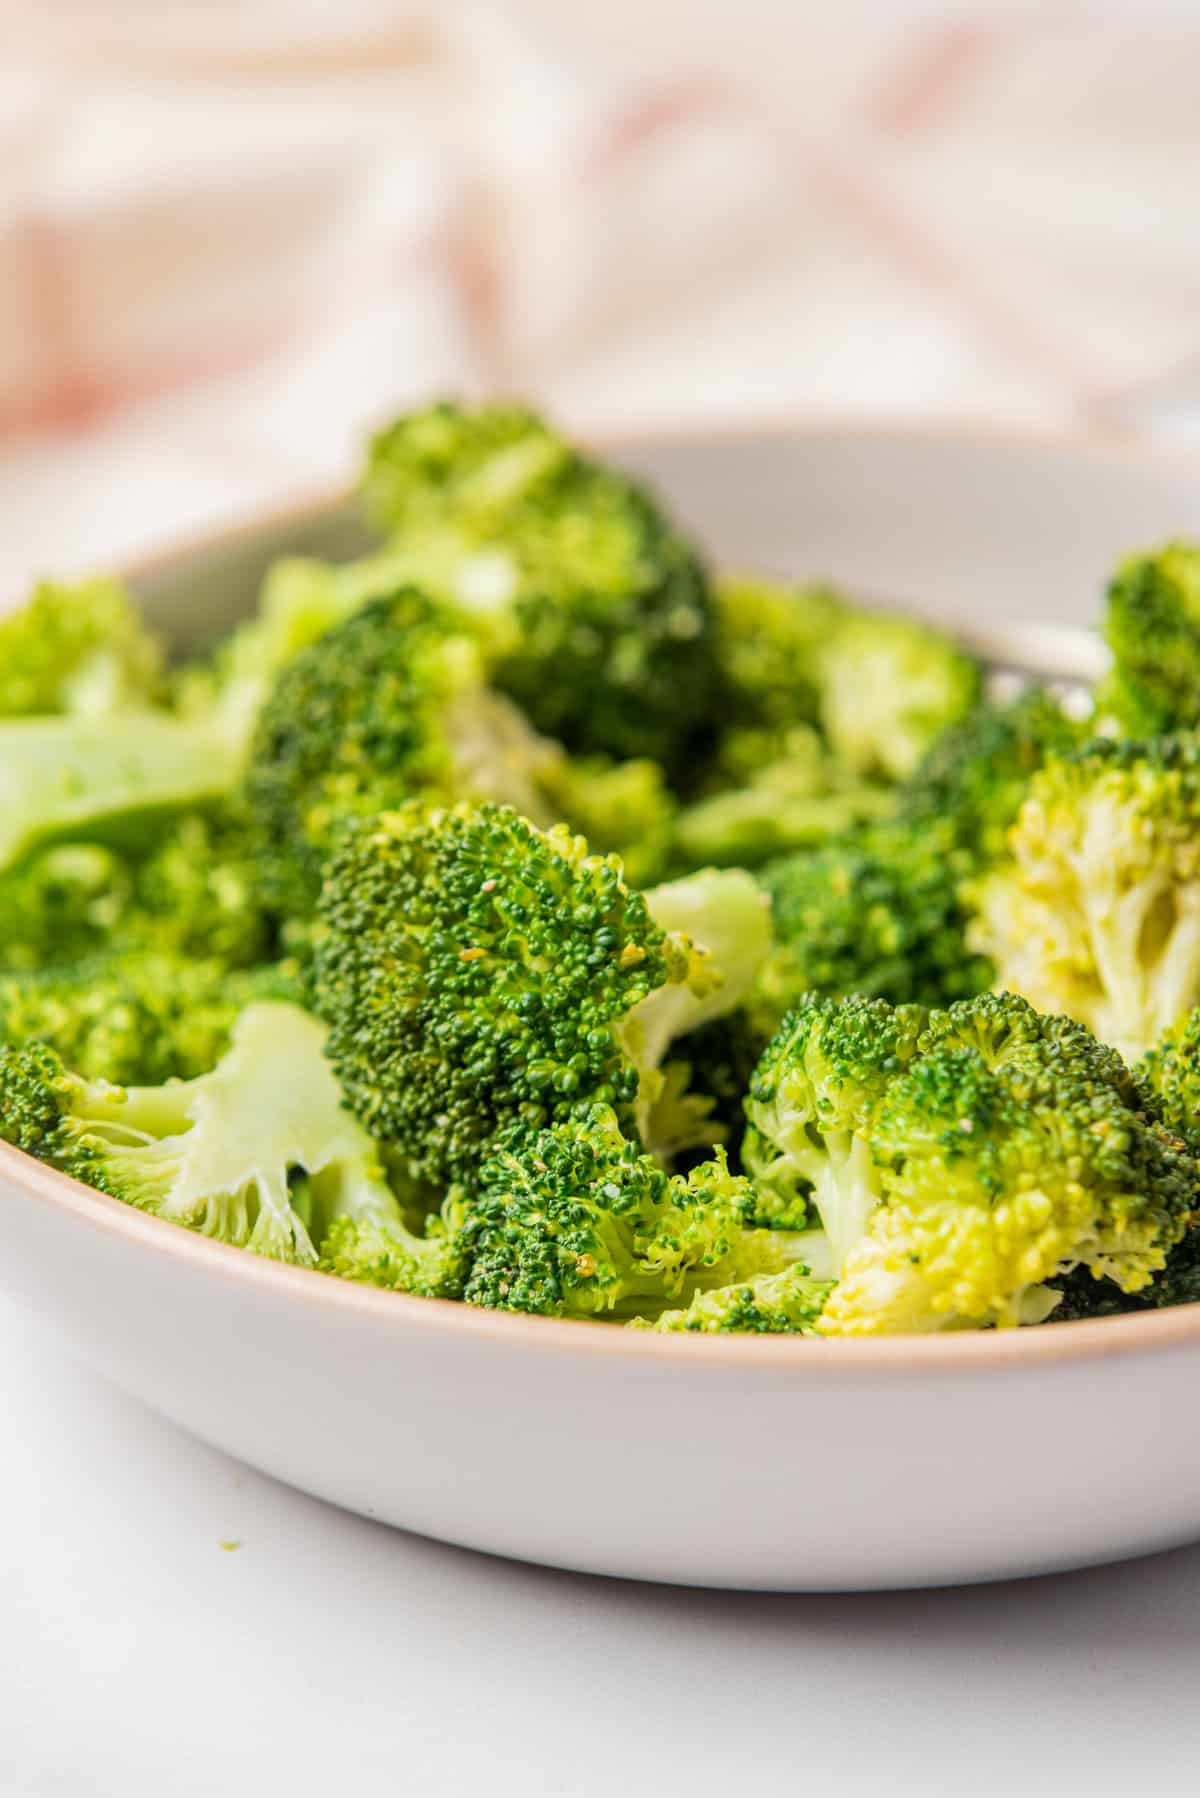 a close up image of microwave broccoli on a dish